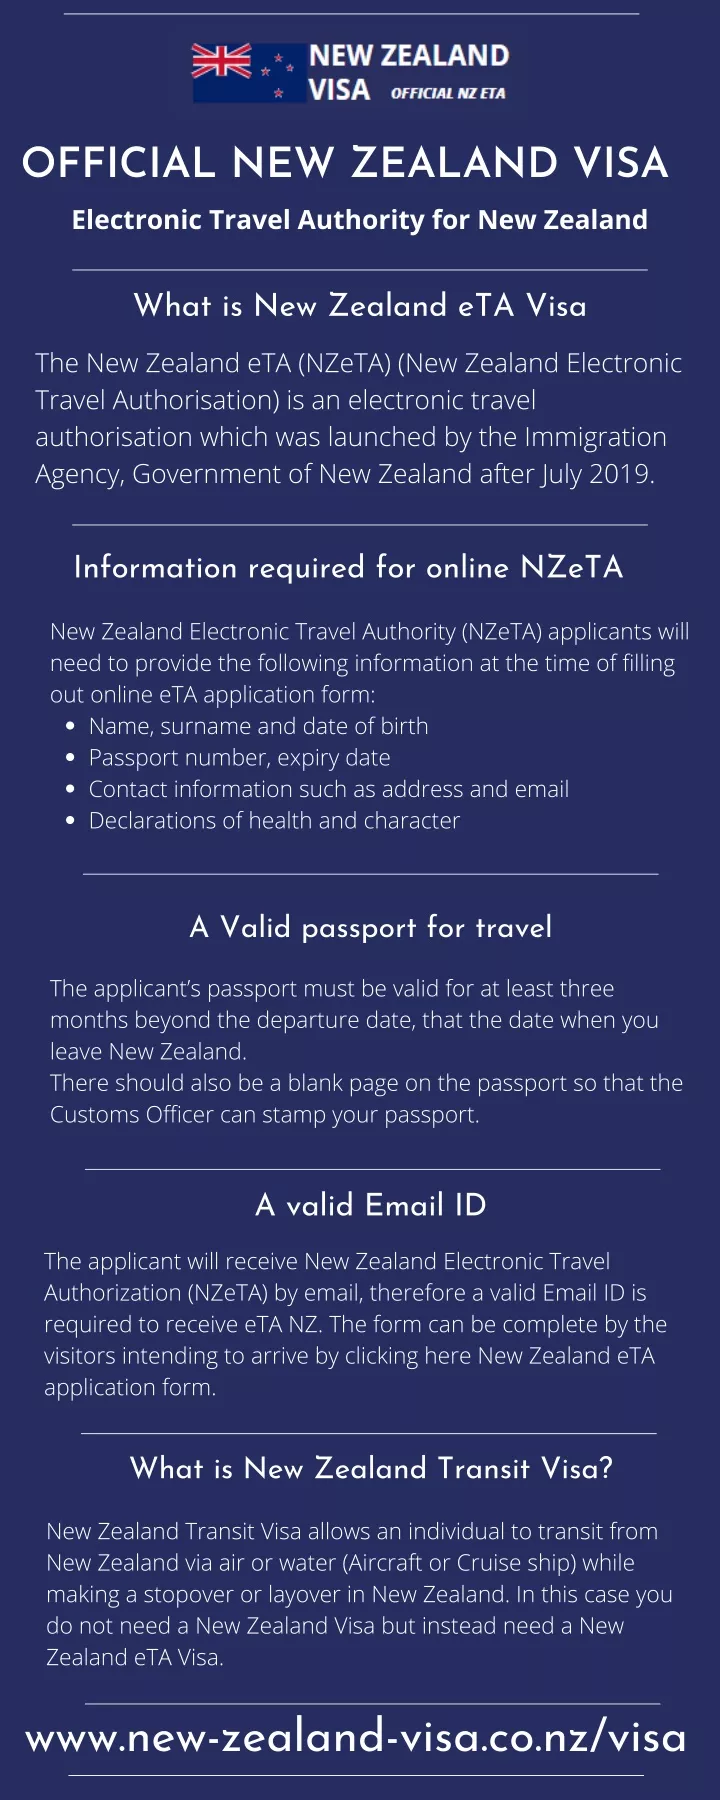 Ppt Official New Zealand Visa Nzeta Electronic Travel Authority For New Zealand Powerpoint 8053